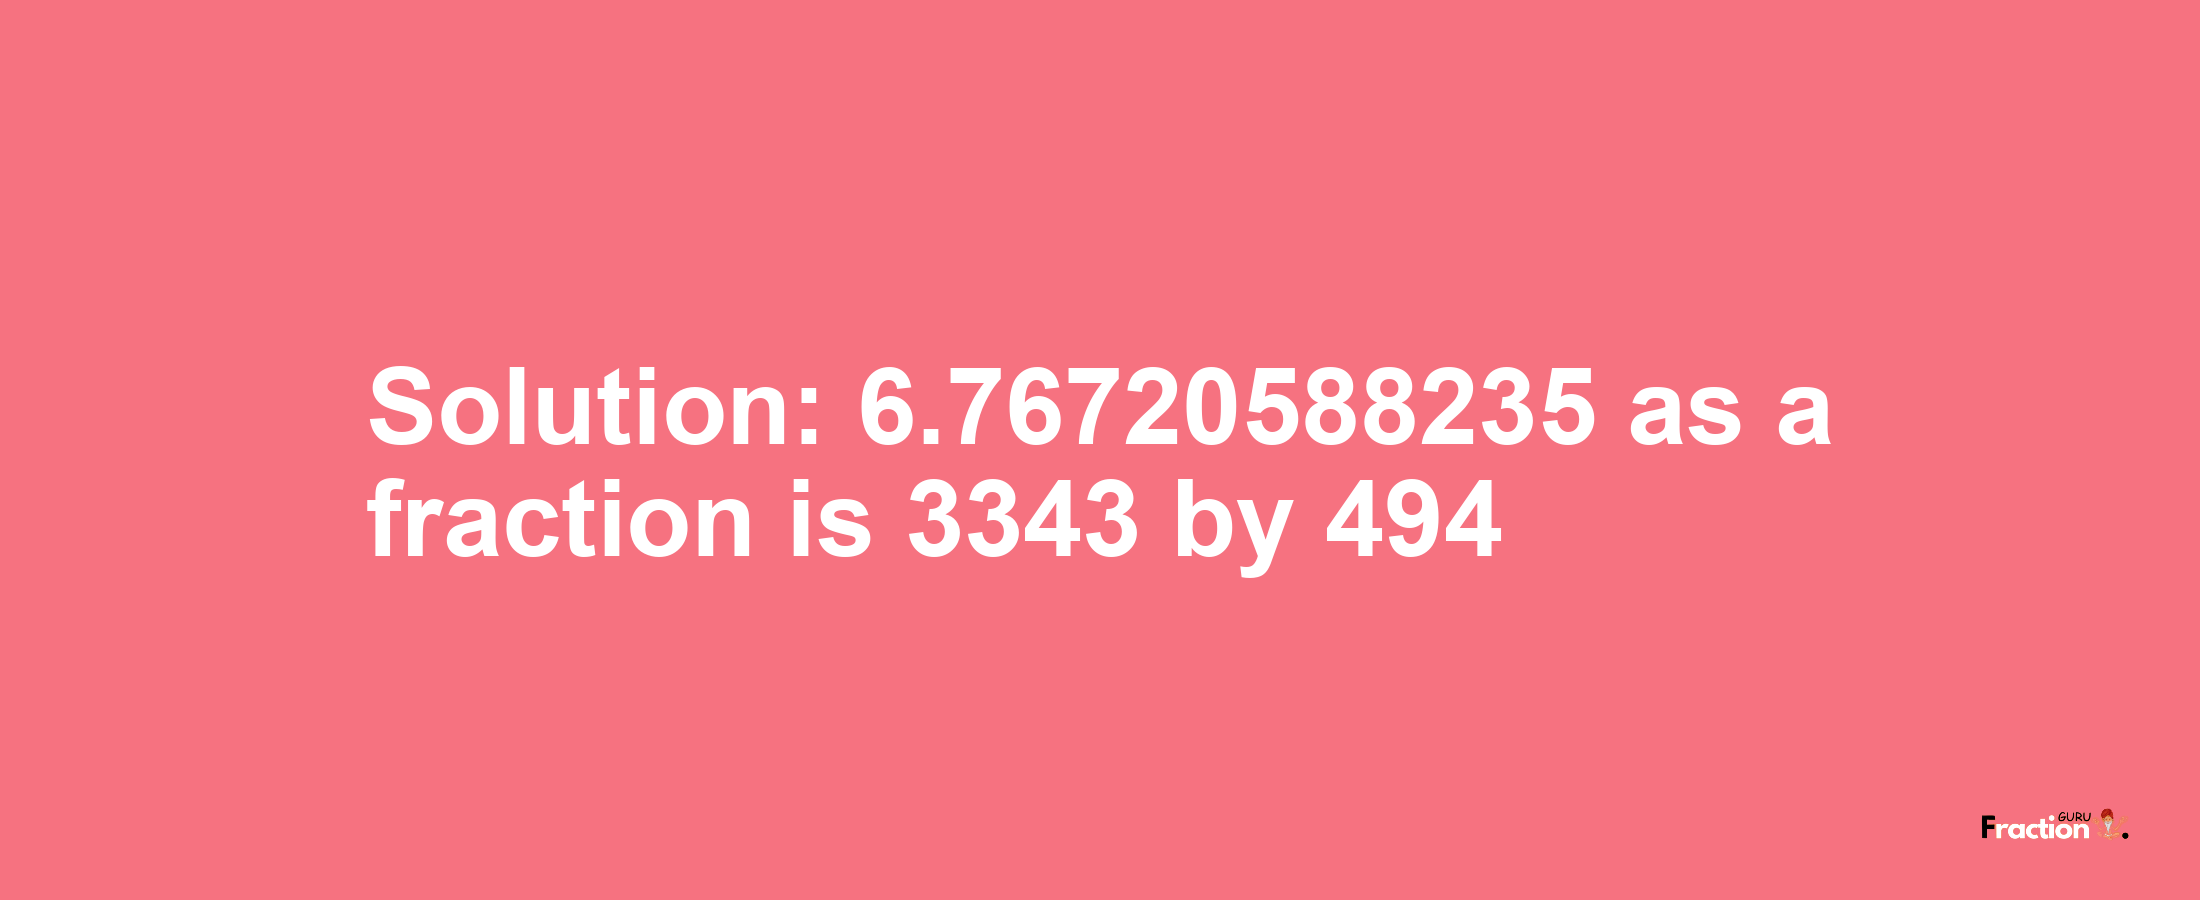 Solution:6.76720588235 as a fraction is 3343/494